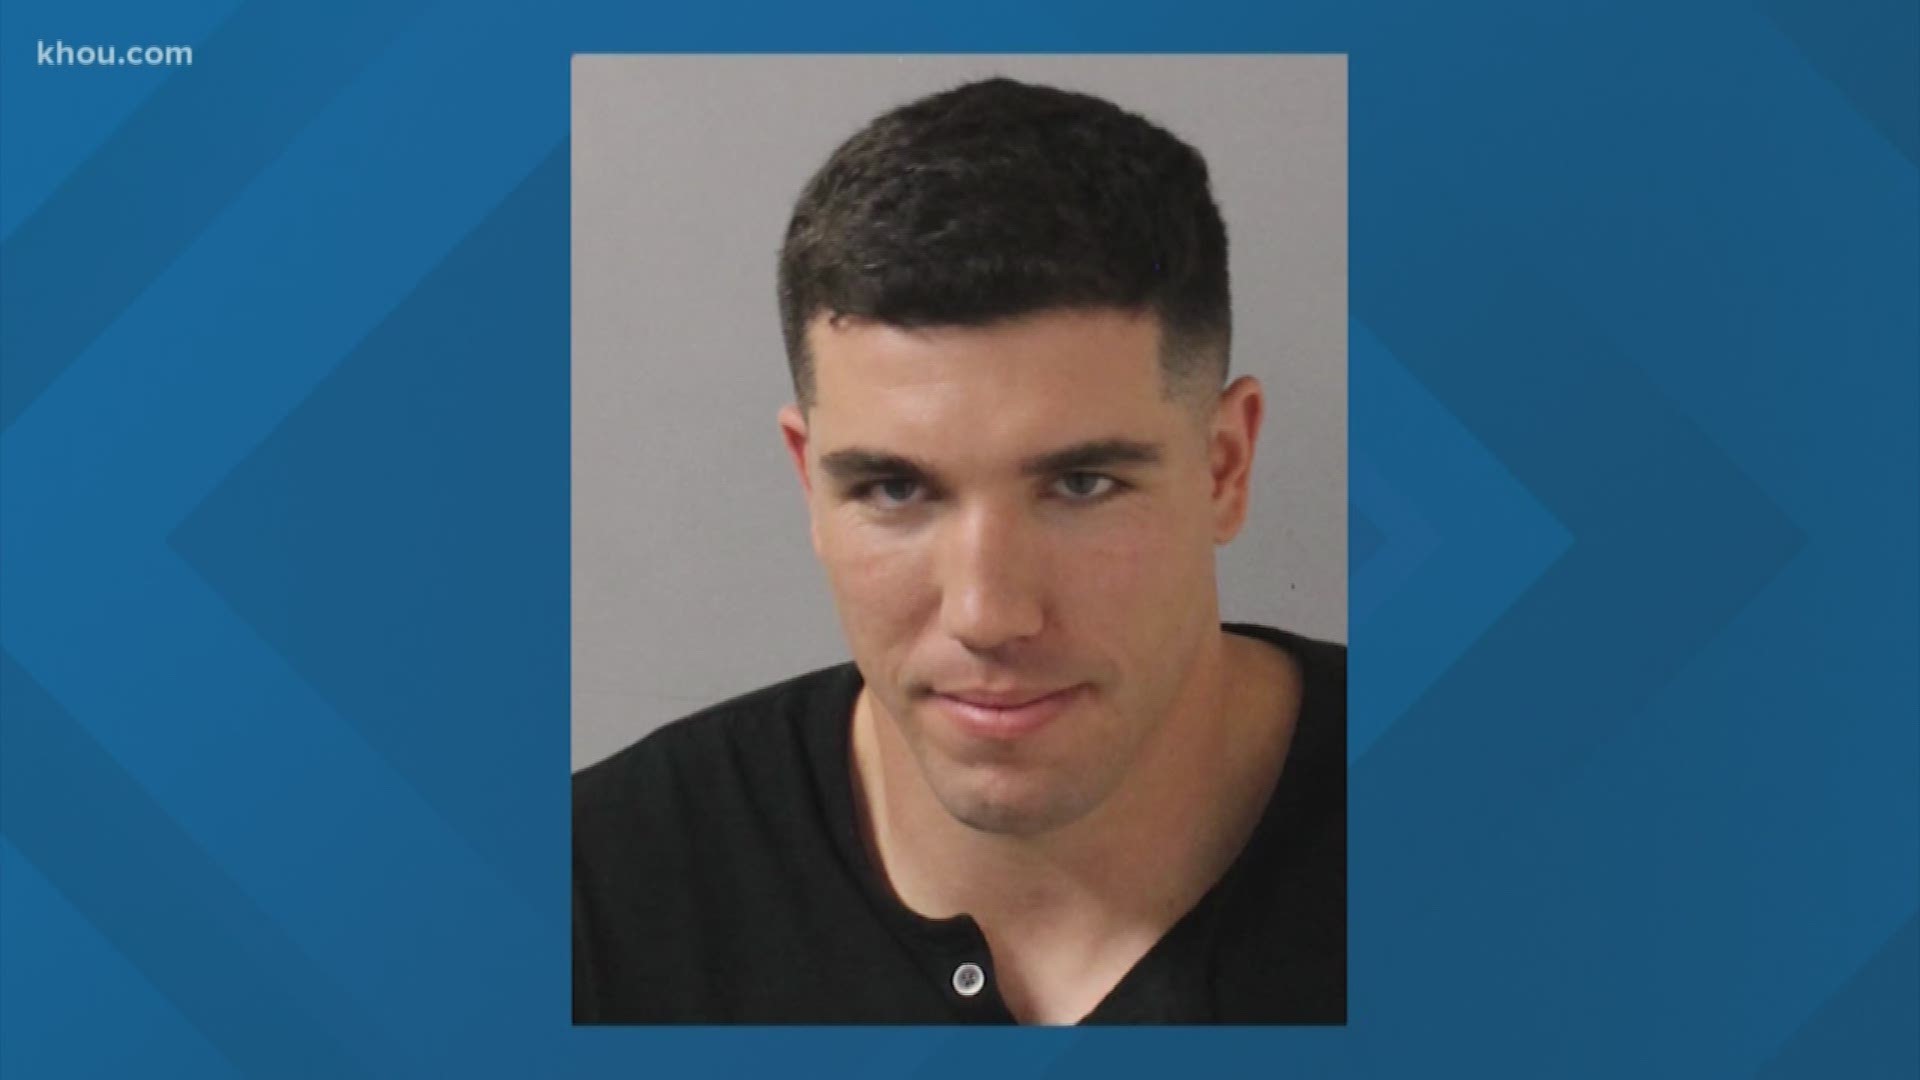 Houston Texans tight end Ryan Griffin was arrested in Nashville overnight. Police say he damaged a downtown hotel, while drunk, by punching one of the front windows.